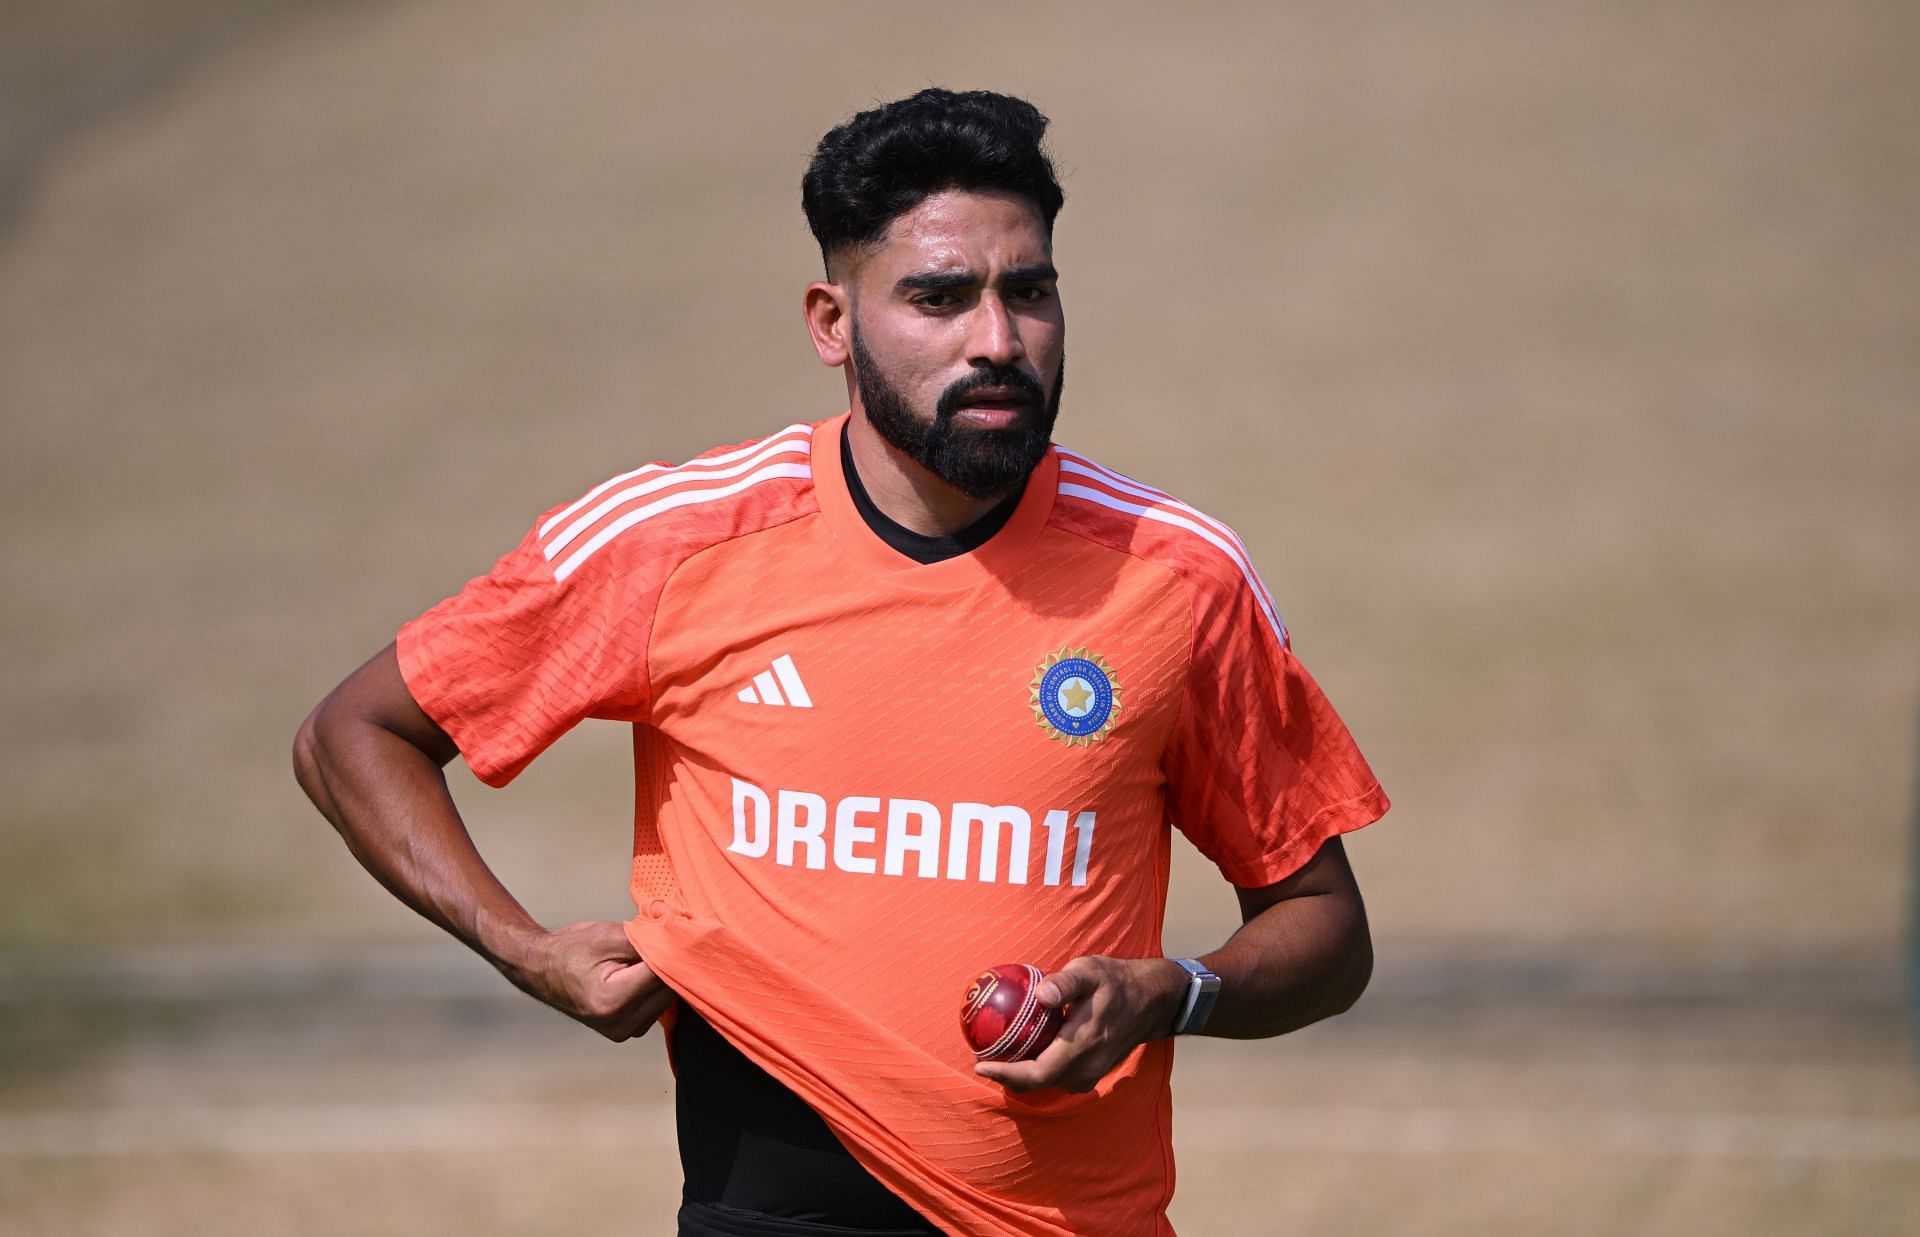 Mohammed Siraj was rested for the second Test